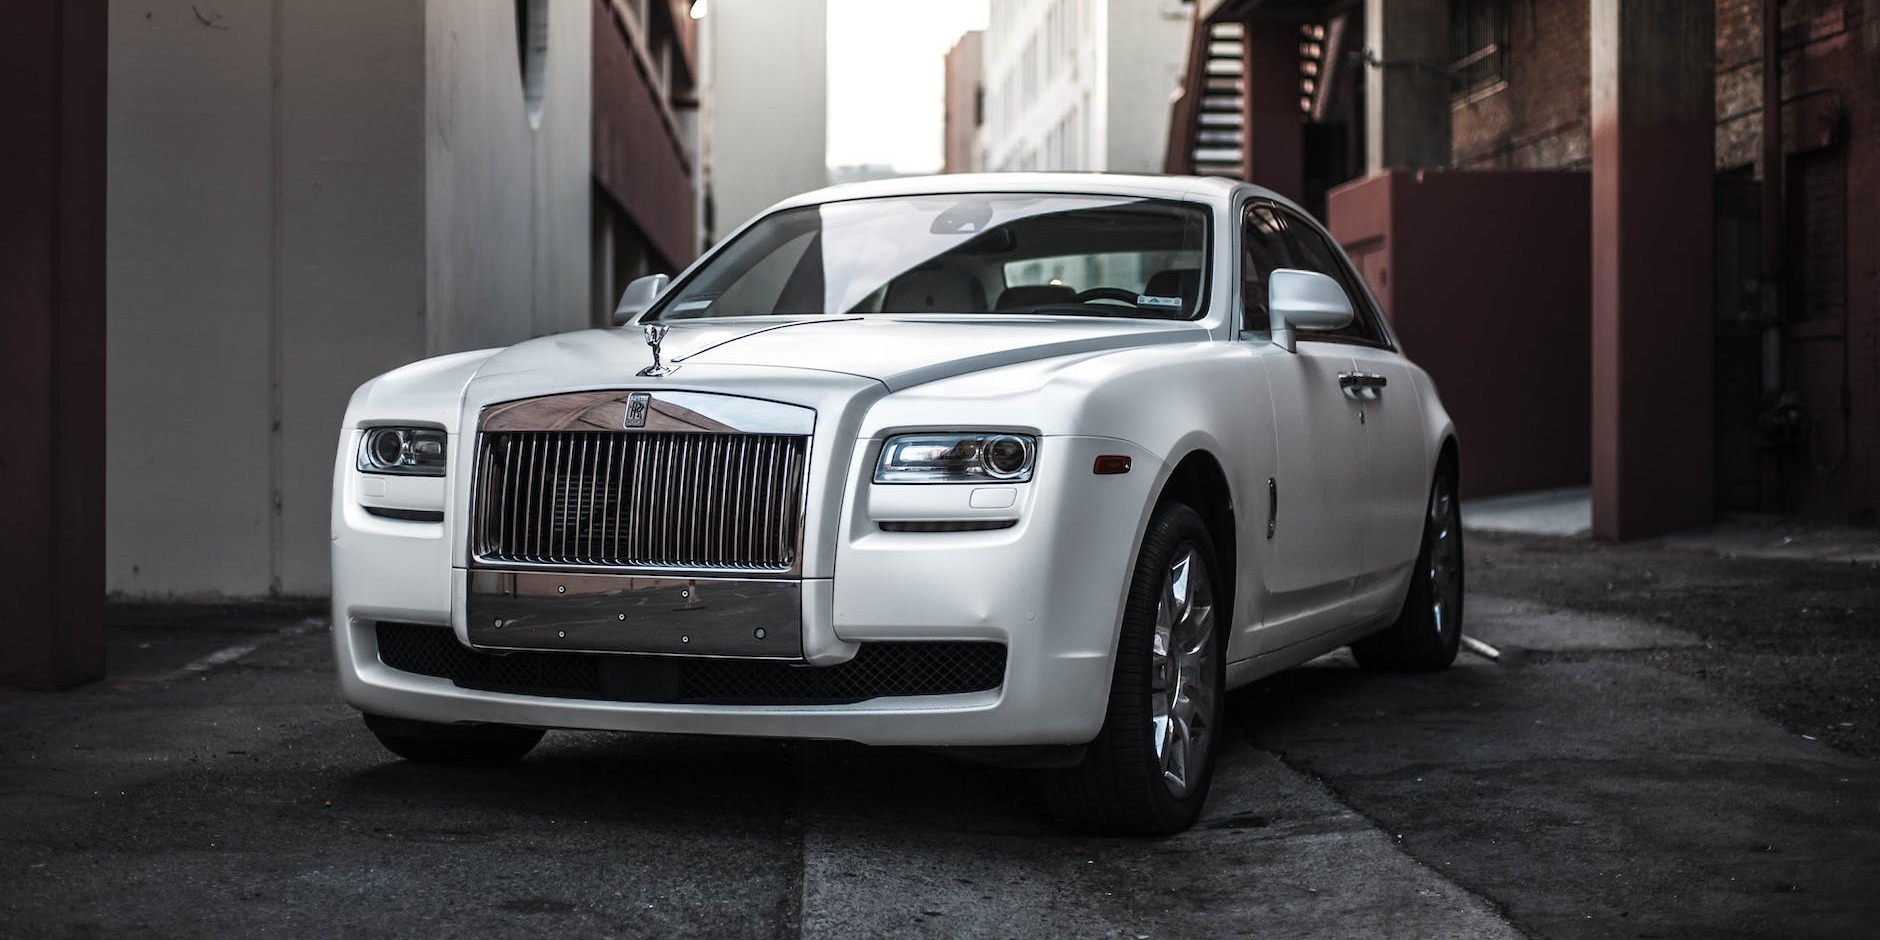 Discovering the Top Features of a Rolls Royce Ghost for Your Next Special Occasion